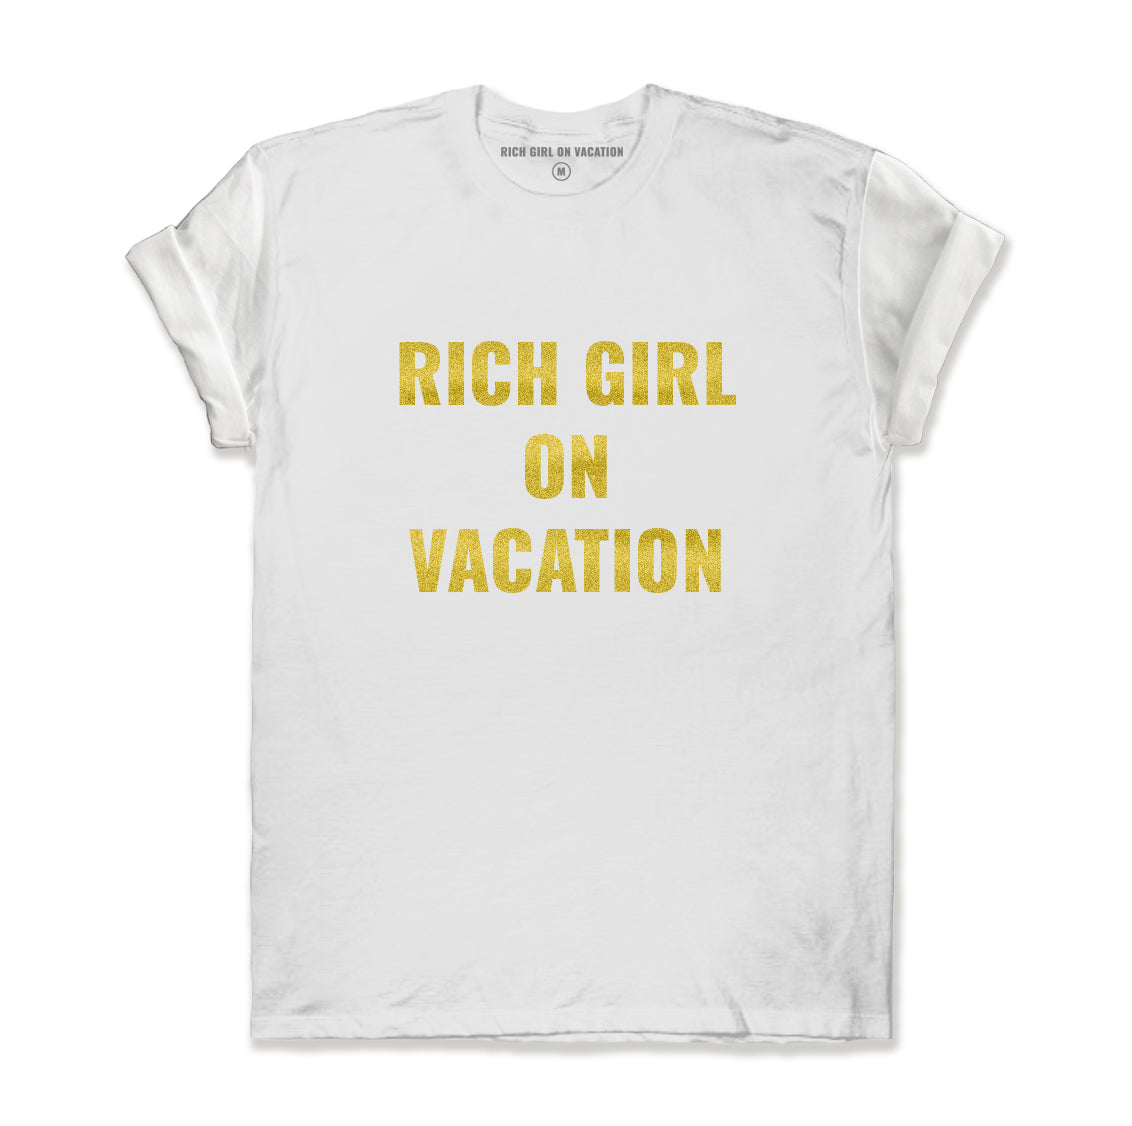 RICH GIRL ON VACATION